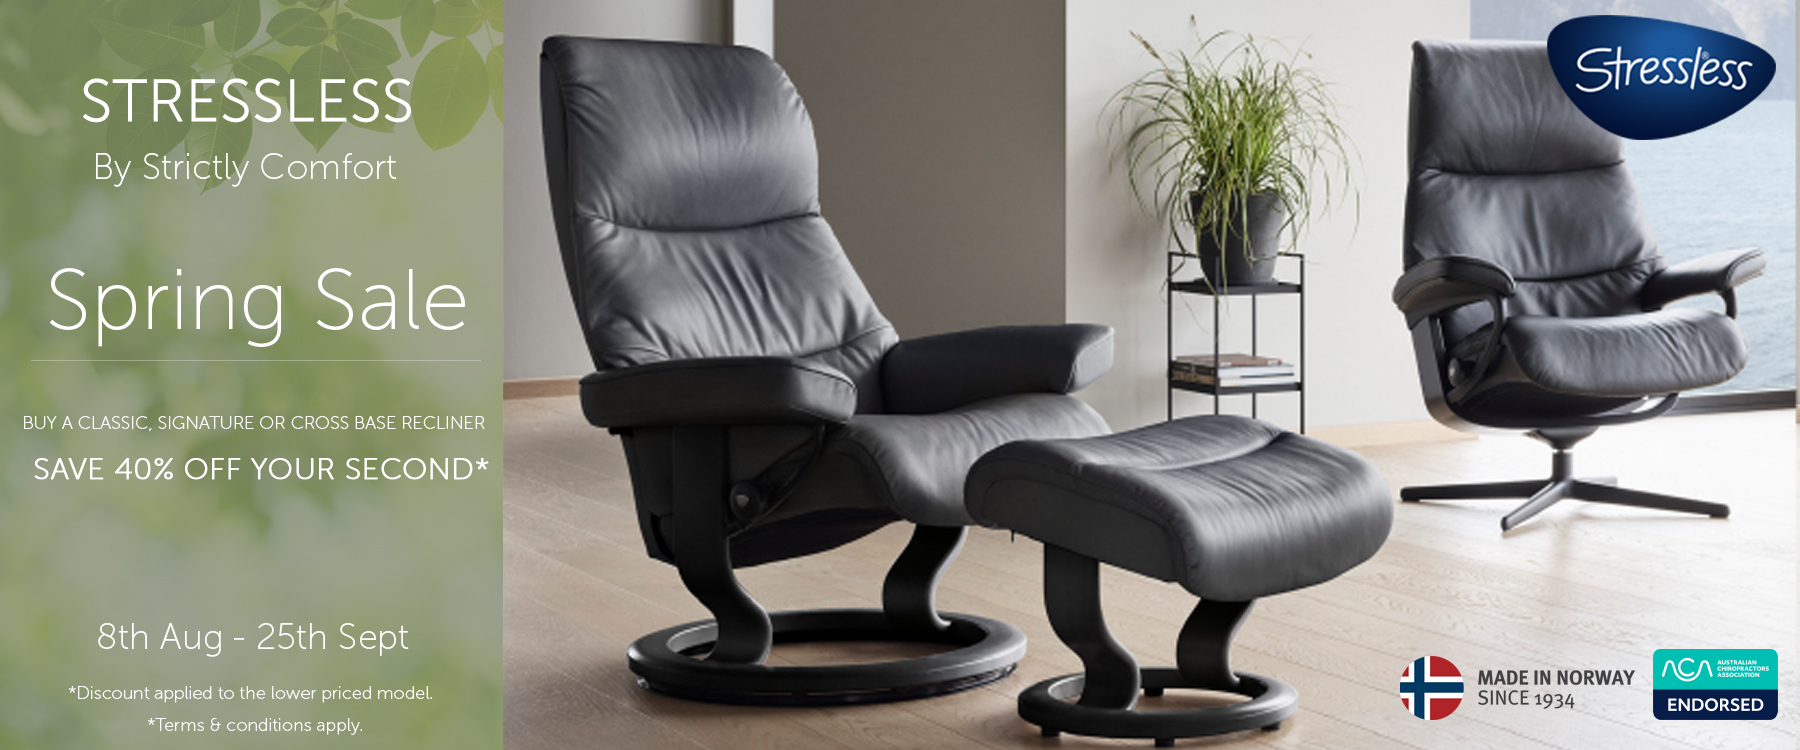 10% off Stressless Items